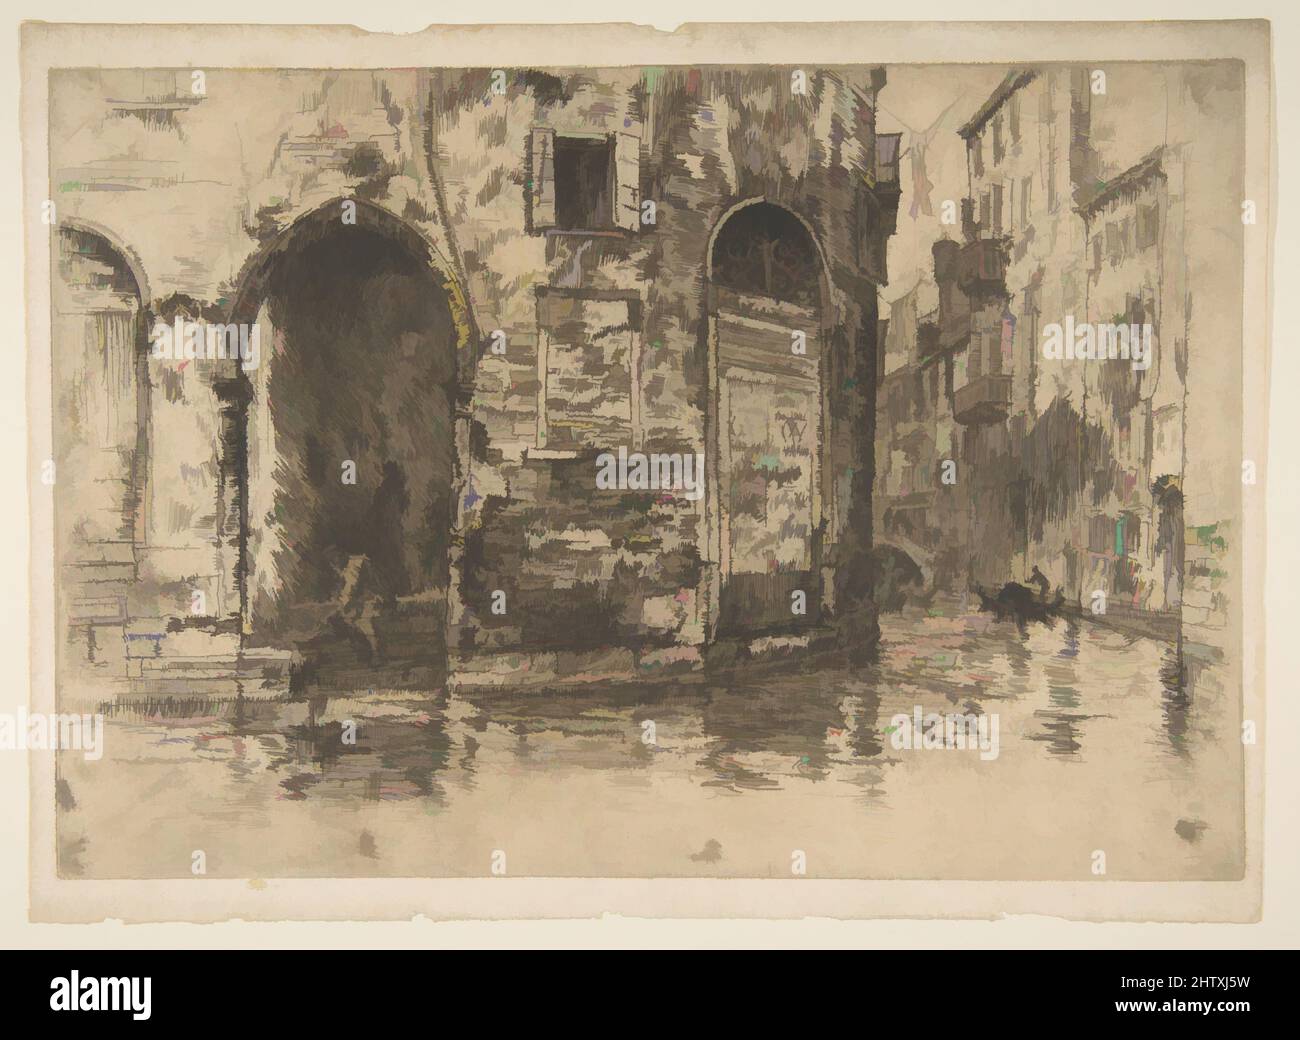 Art inspired by Two Doorways, 1879–80, Etching and drypoint; fourth state of thirteen (Glasgow); printed in black ink on ivory laid paper, Plate: 7 15/16 x 11 1/2 in. (20.2 x 29.2 cm), Prints, James McNeill Whistler (American, Lowell, Massachusetts 1834–1903 London, Classic works modernized by Artotop with a splash of modernity. Shapes, color and value, eye-catching visual impact on art. Emotions through freedom of artworks in a contemporary way. A timeless message pursuing a wildly creative new direction. Artists turning to the digital medium and creating the Artotop NFT Stock Photo